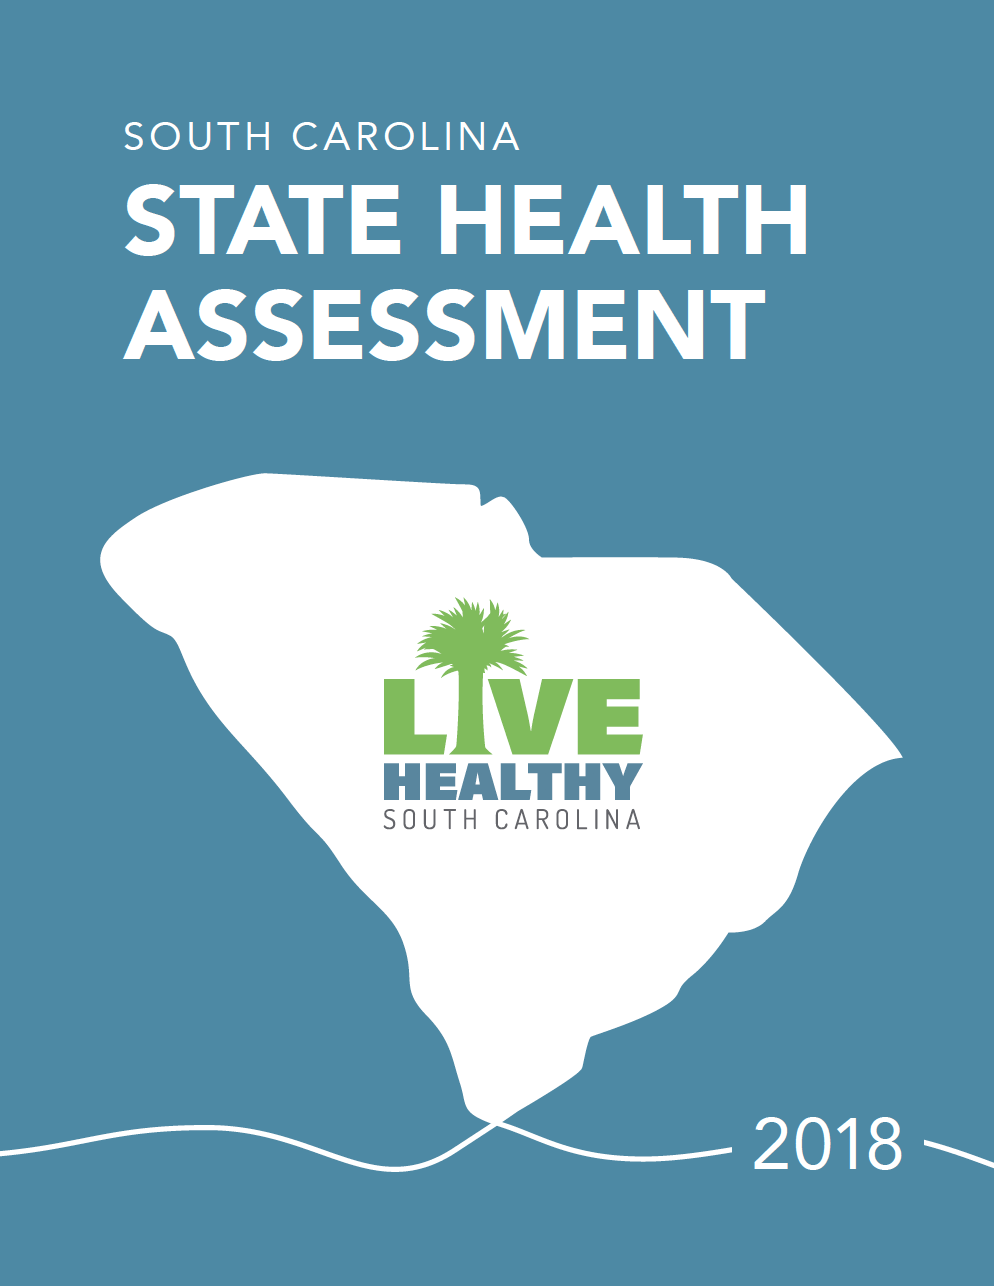 Cover Image for the State Health Assessment